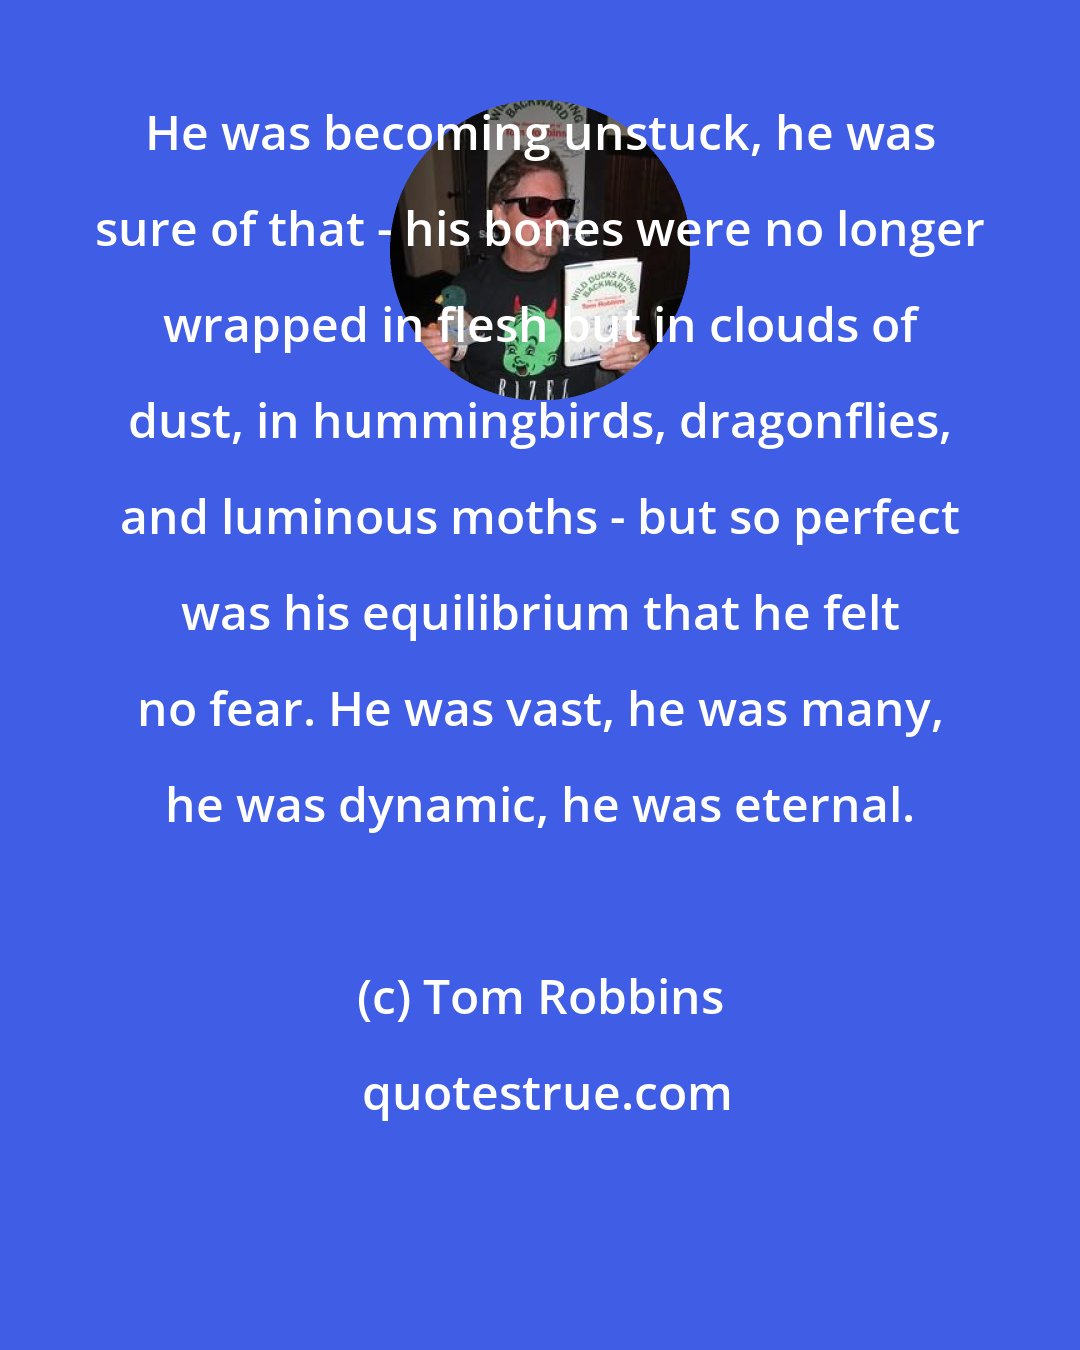 Tom Robbins: He was becoming unstuck, he was sure of that - his bones were no longer wrapped in flesh but in clouds of dust, in hummingbirds, dragonflies, and luminous moths - but so perfect was his equilibrium that he felt no fear. He was vast, he was many, he was dynamic, he was eternal.